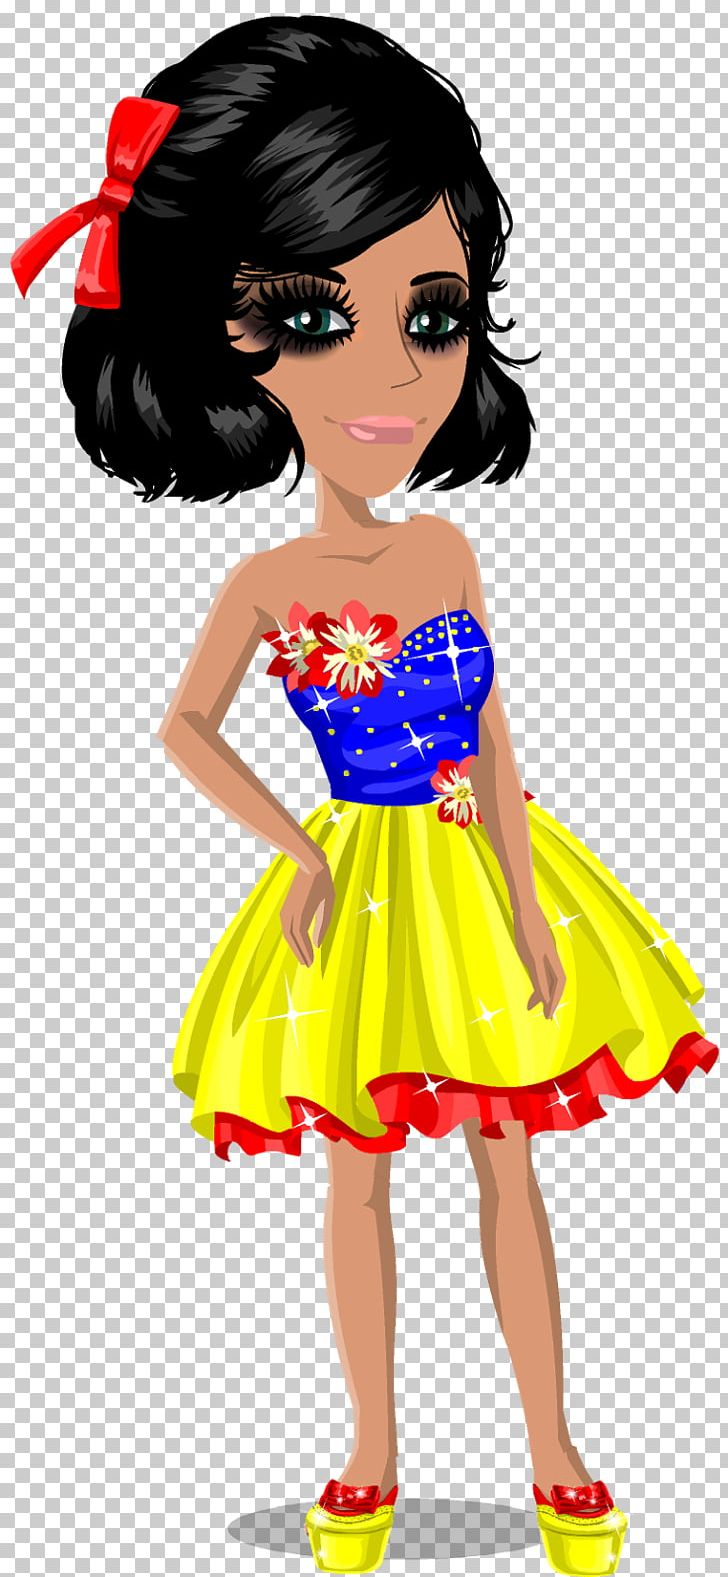 Dress Fashion Halloween Costume PNG, Clipart, Barbie, Black Hair, Brown Hair, Clothing, Costume Free PNG Download